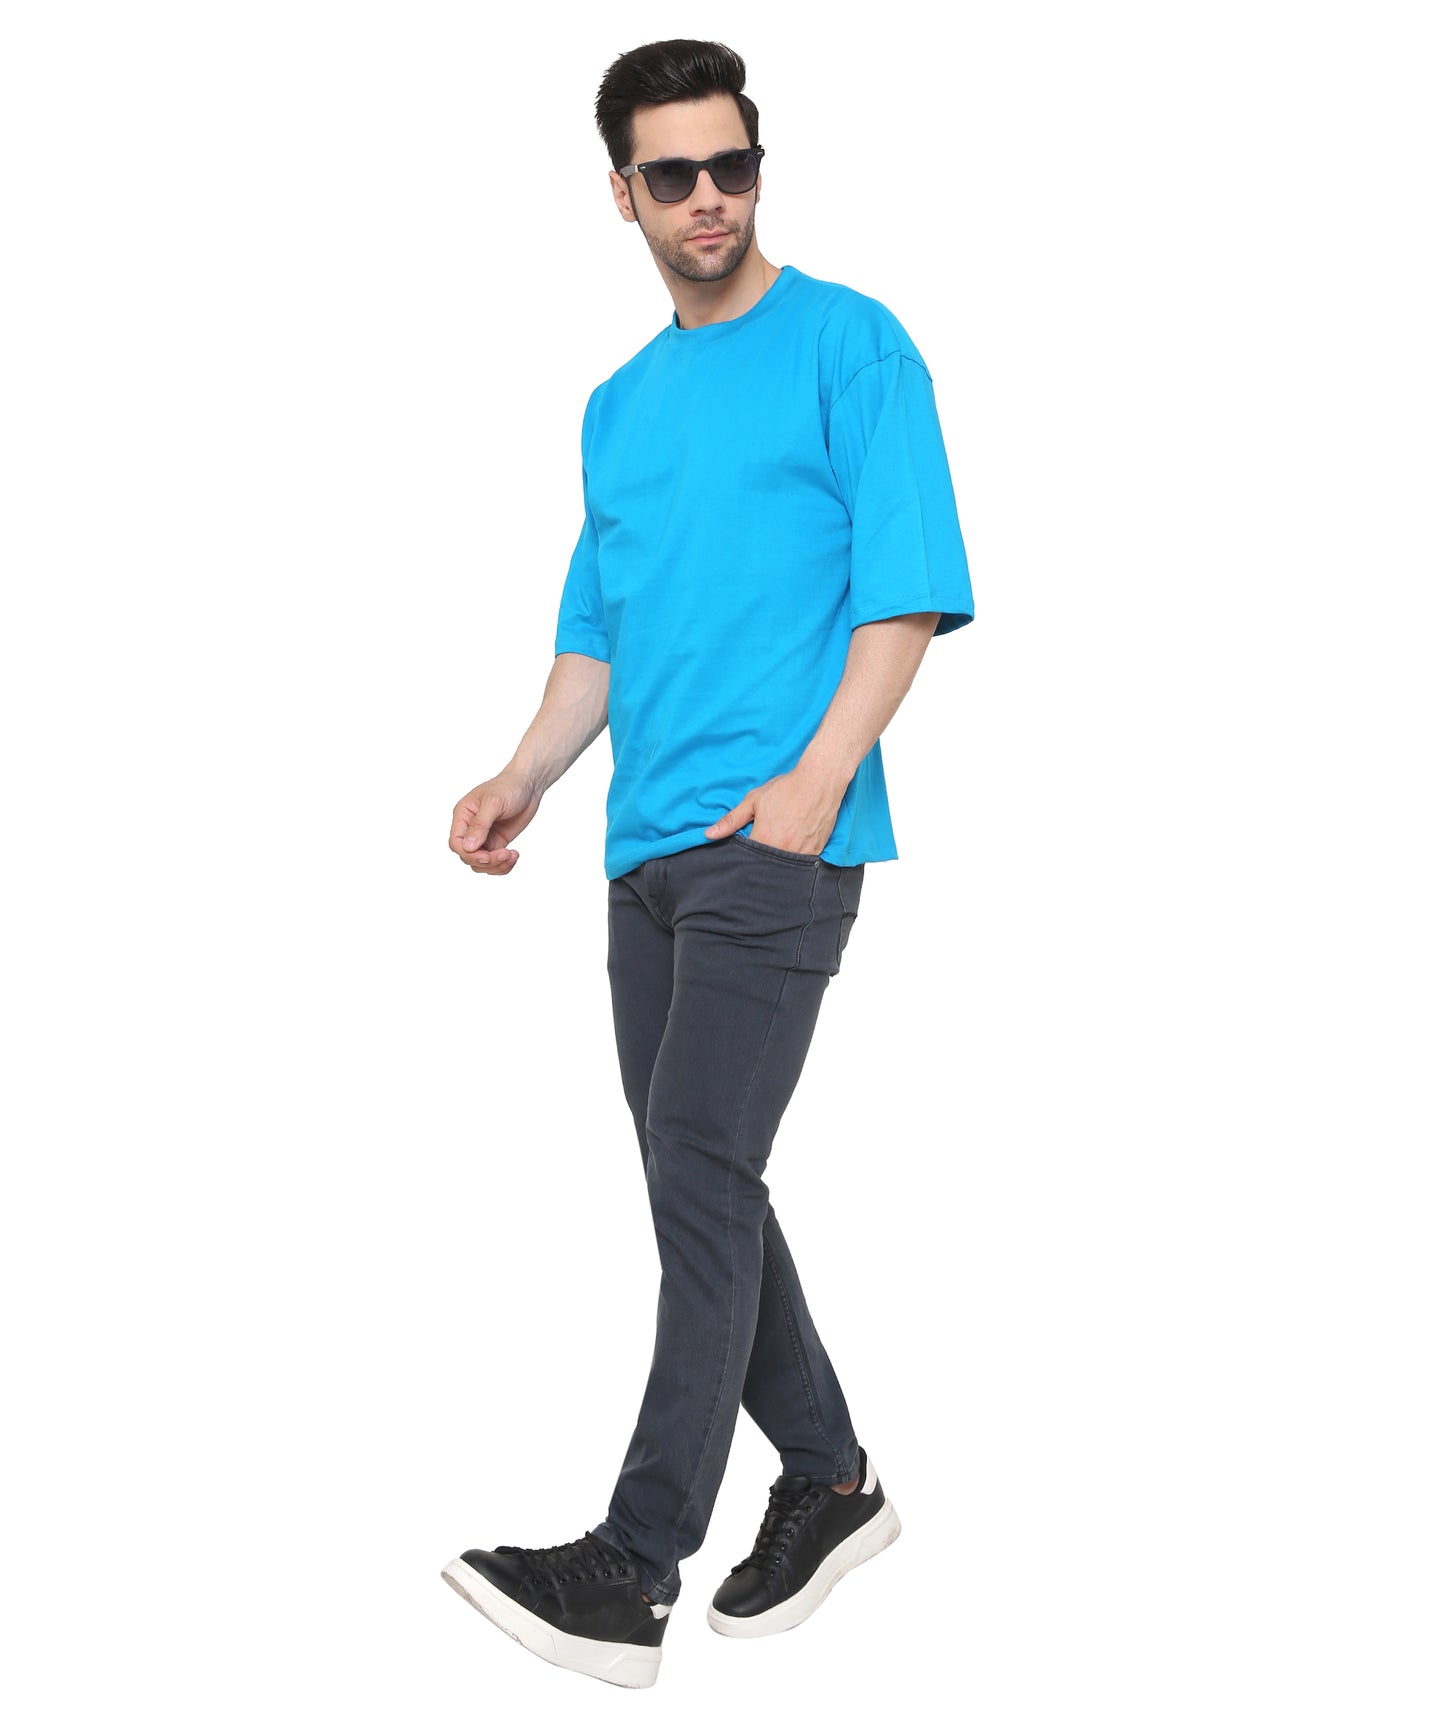 Ball Blue Oversized Cotton T-shirts Relaxed Fit Tees for Men